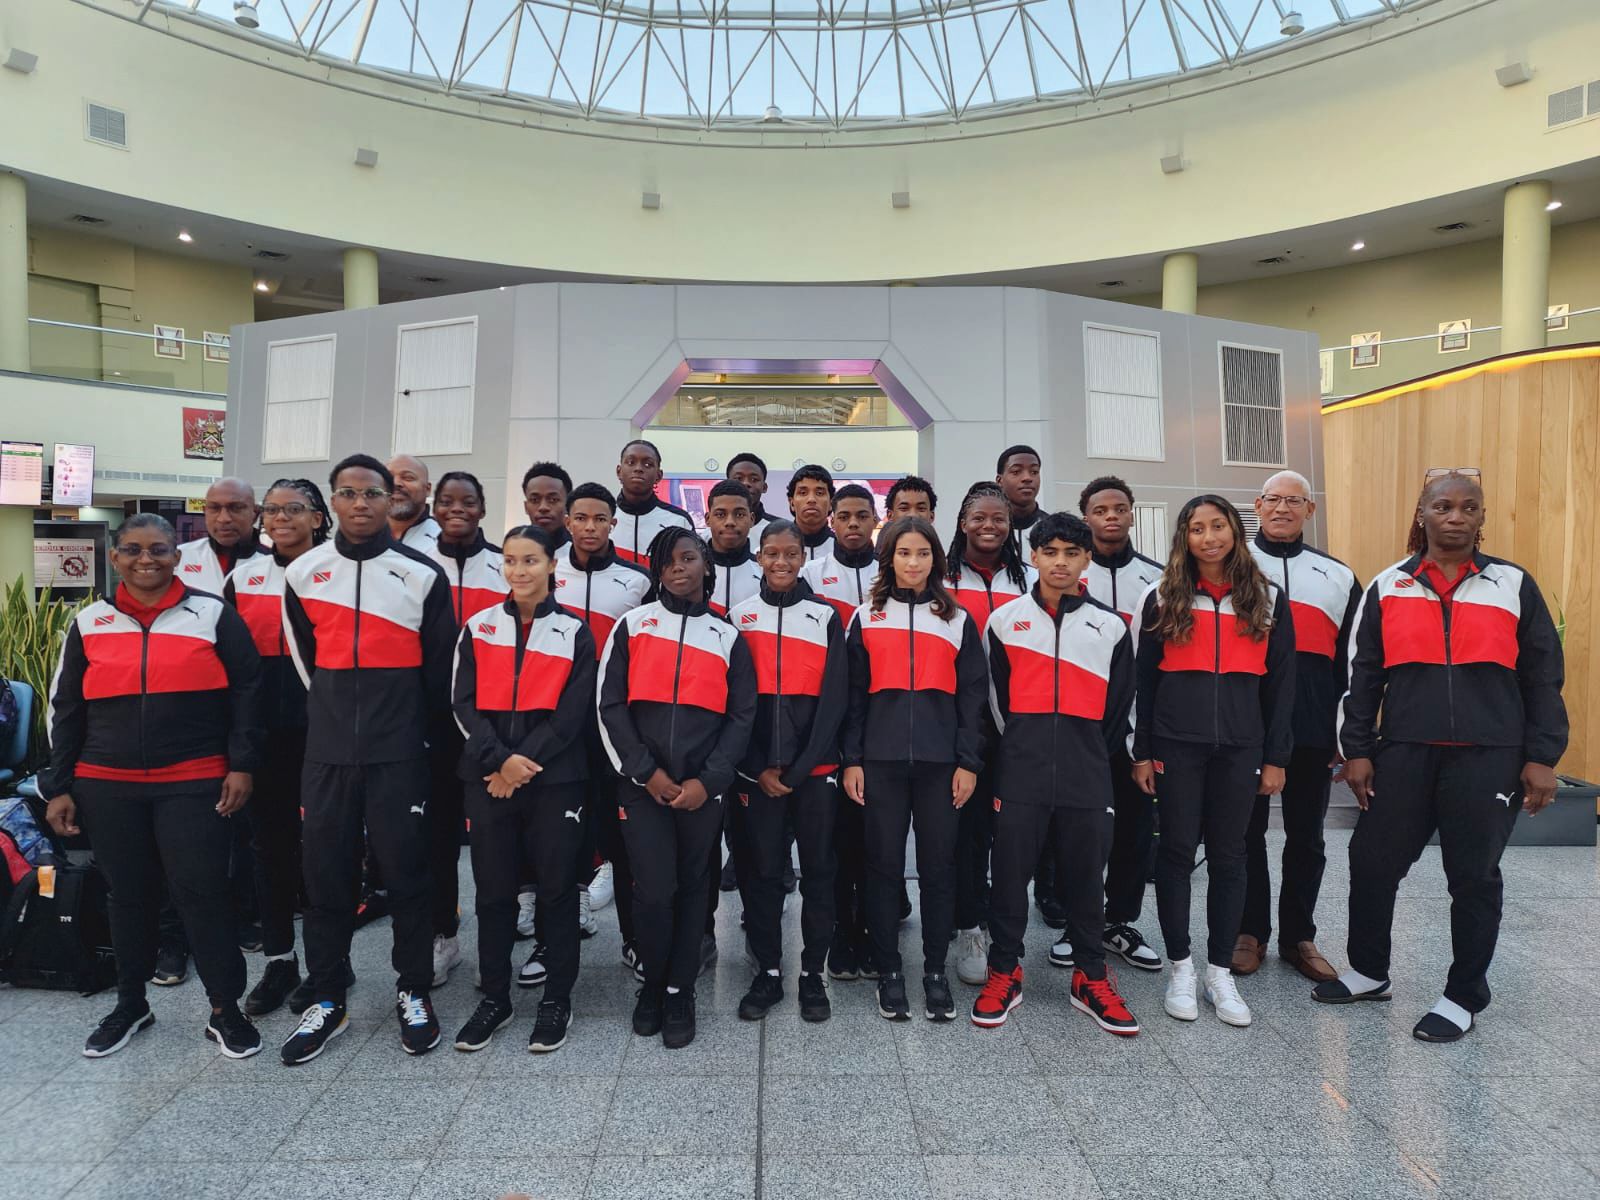 T&T swimmers and officials pose for a team photo prior to their departure from Piarco International Airport for Bahamas via Jamaica to compete at this weekends’ 37th Carifta Swimming Championships at the Betty Kelly- Kenning Aquatic Centre in Nassau, Bahamas from Saturday, March 30 to Tuesday, April 2. PICTURE ASAT&T (Image obtained at guardian.co.tt)